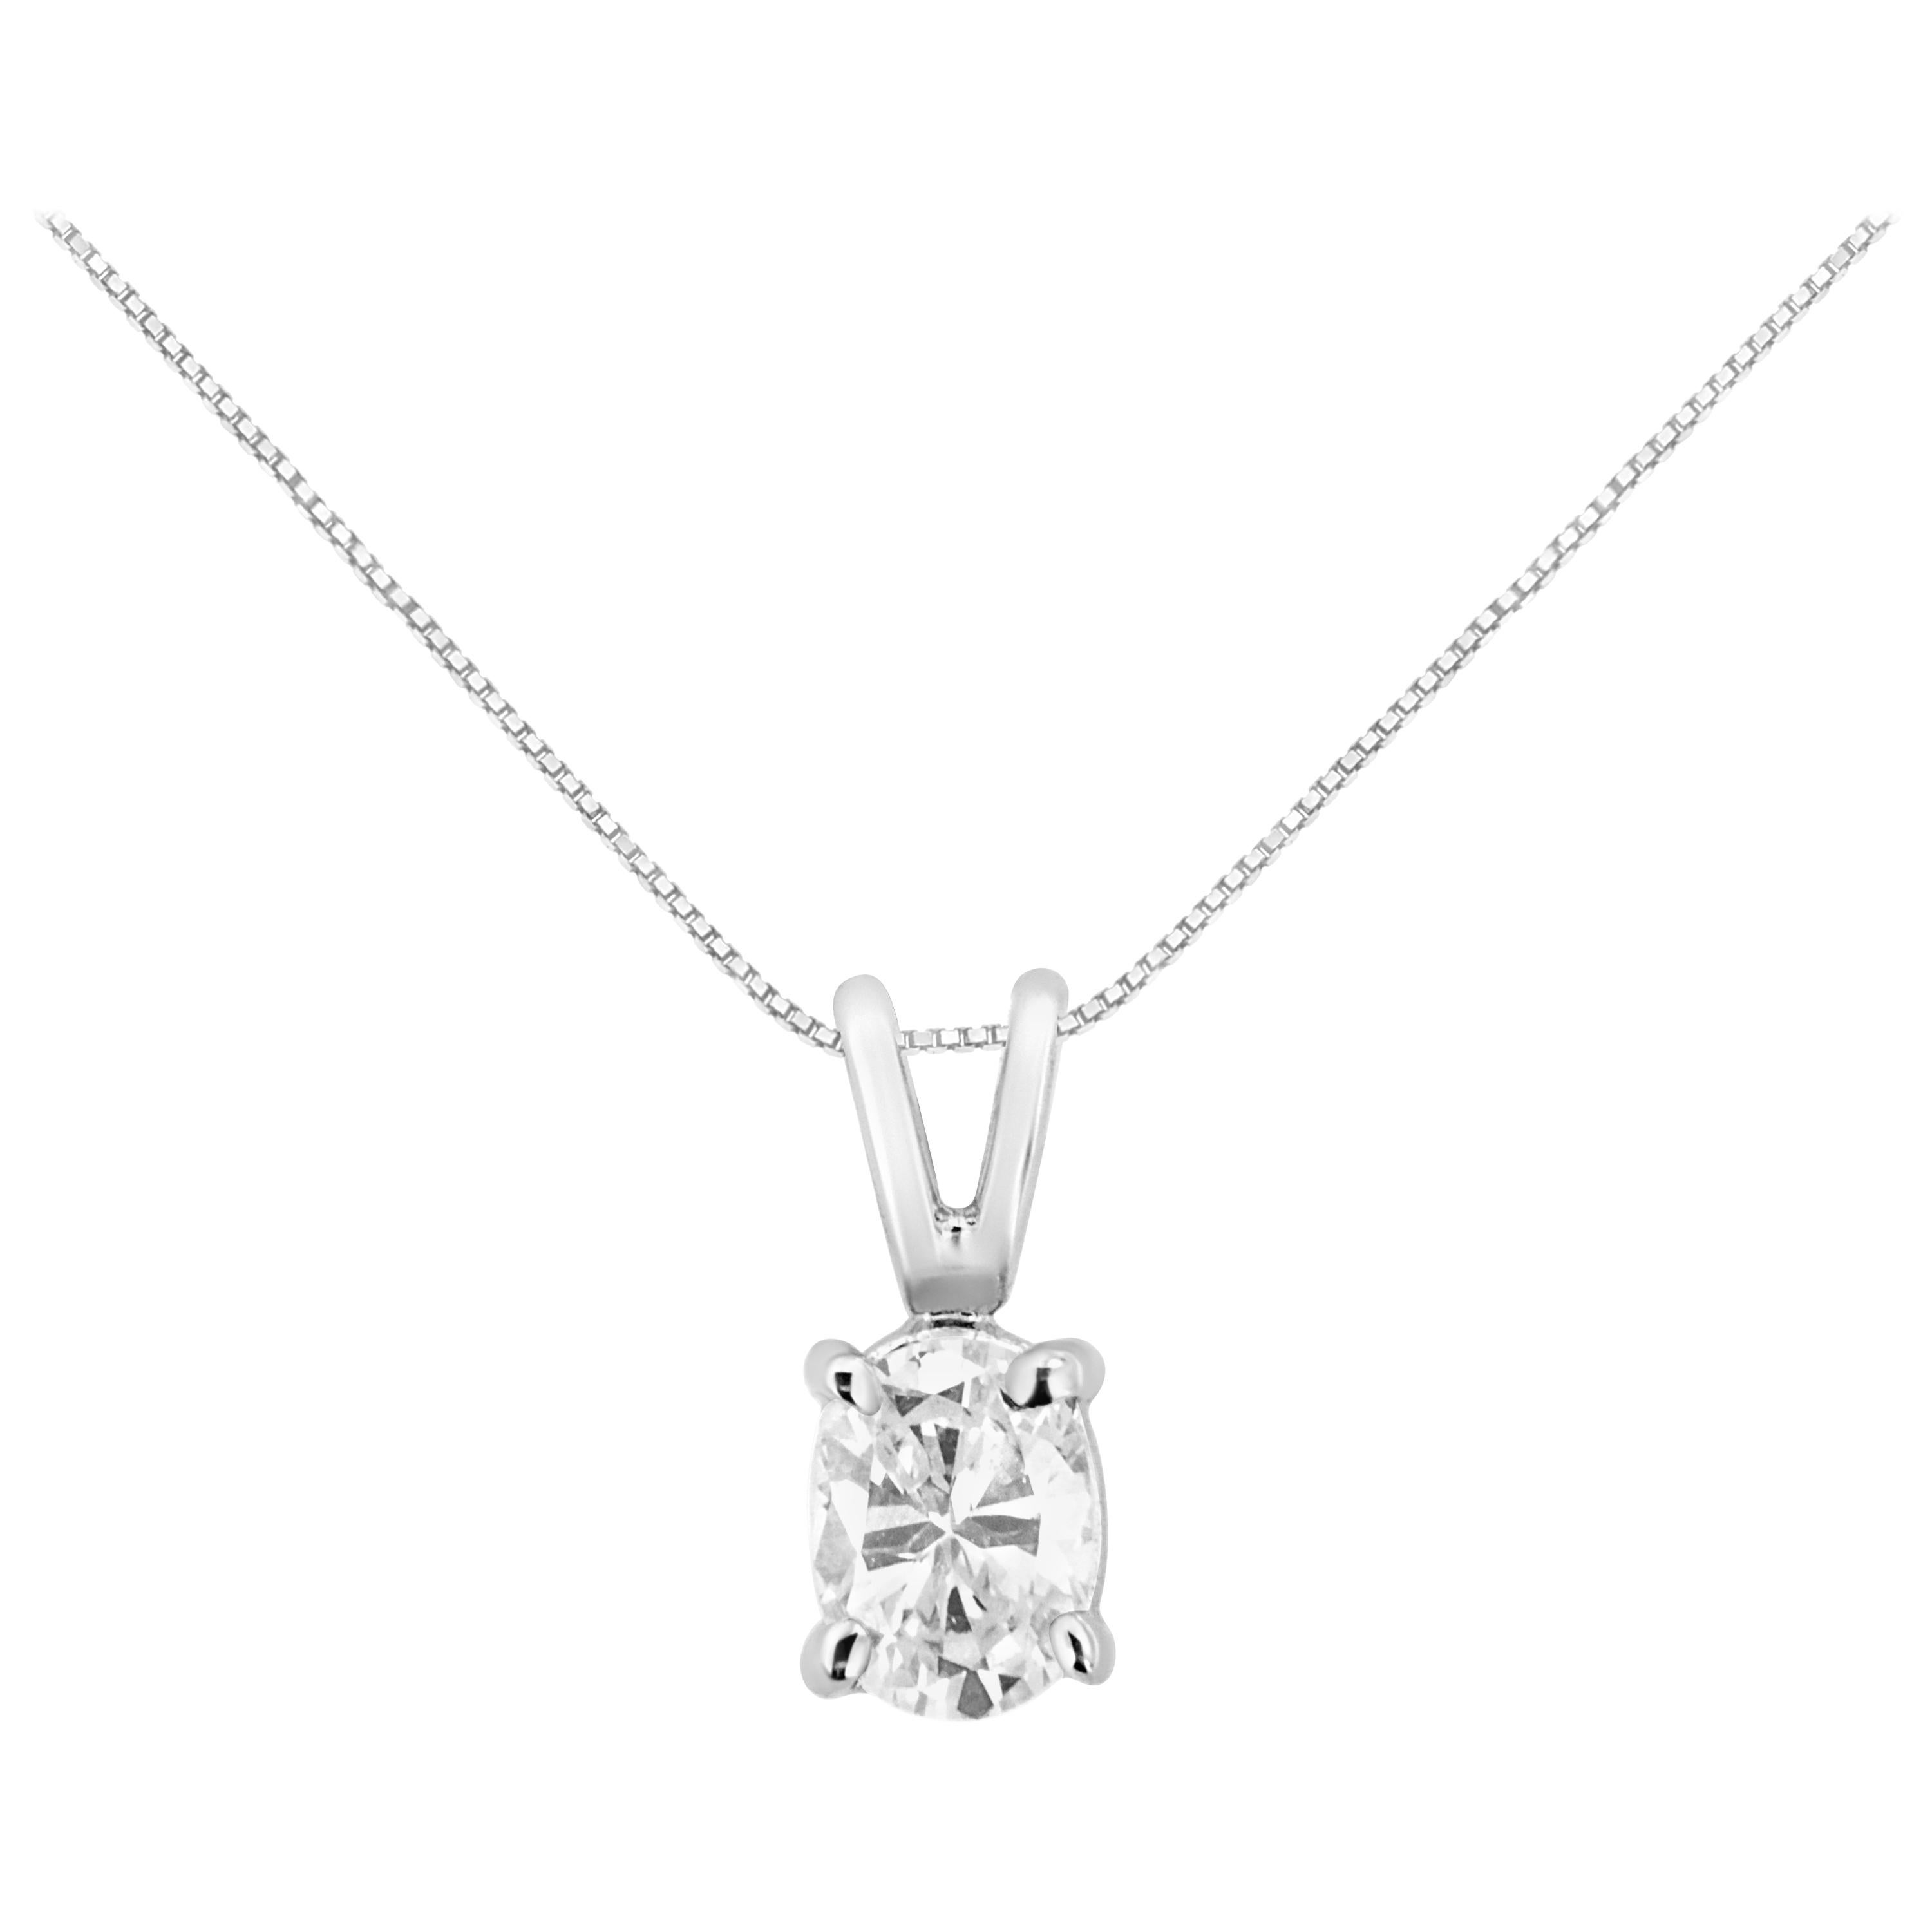 AGS Certified 14K White Gold 1/3 Carat Oval Diamond Pendant Necklace